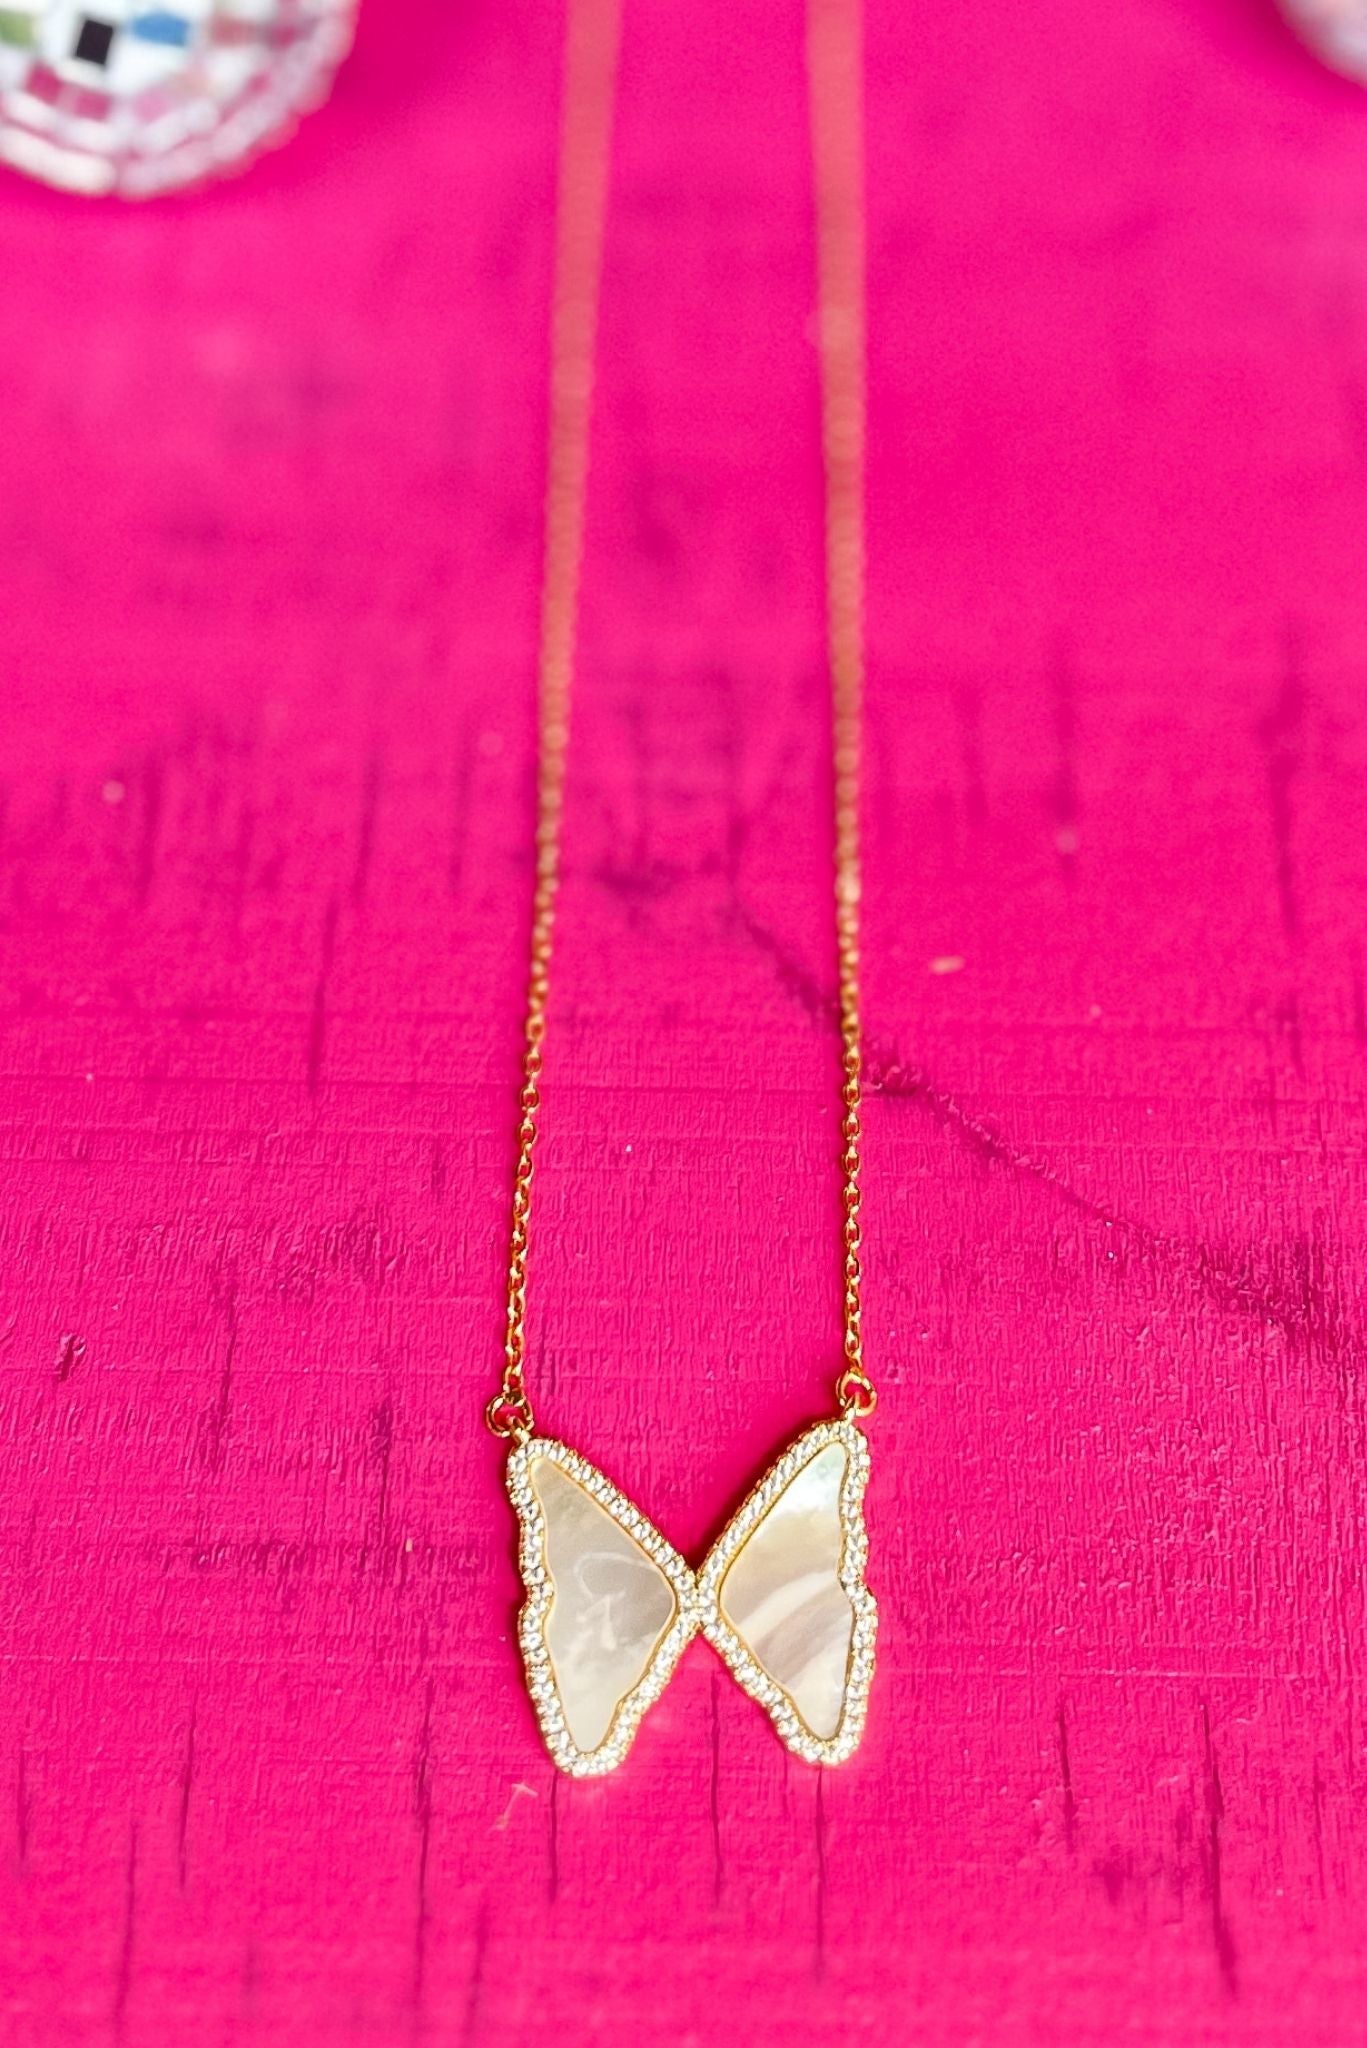 SSYS Gold Pearlescent Butterfly Pendant Dainty Necklace, Accessory, Necklace, Shop Style Your Senses by Mallory Fitzsimmons